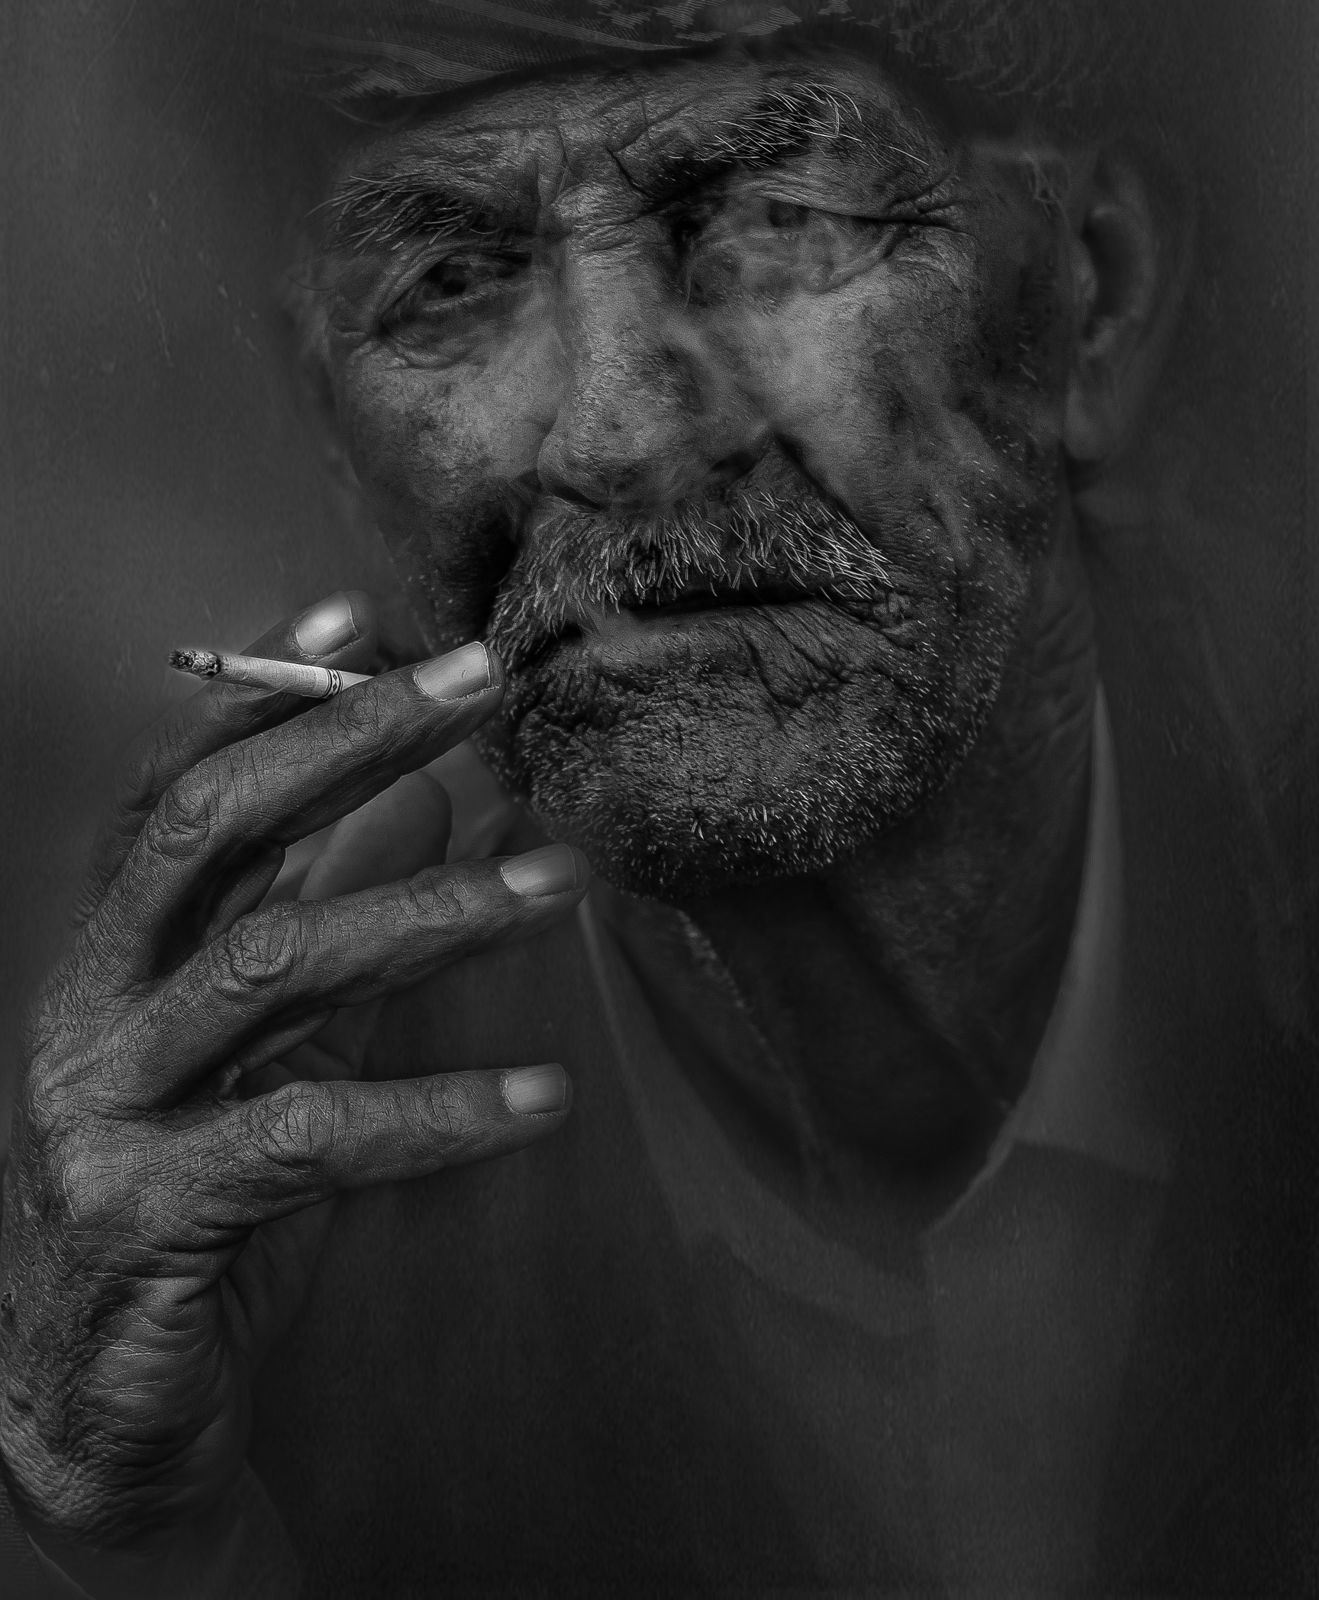 Person Man Black And White Portrait Old Wallpaper.com. Best High Quality Wallpaper